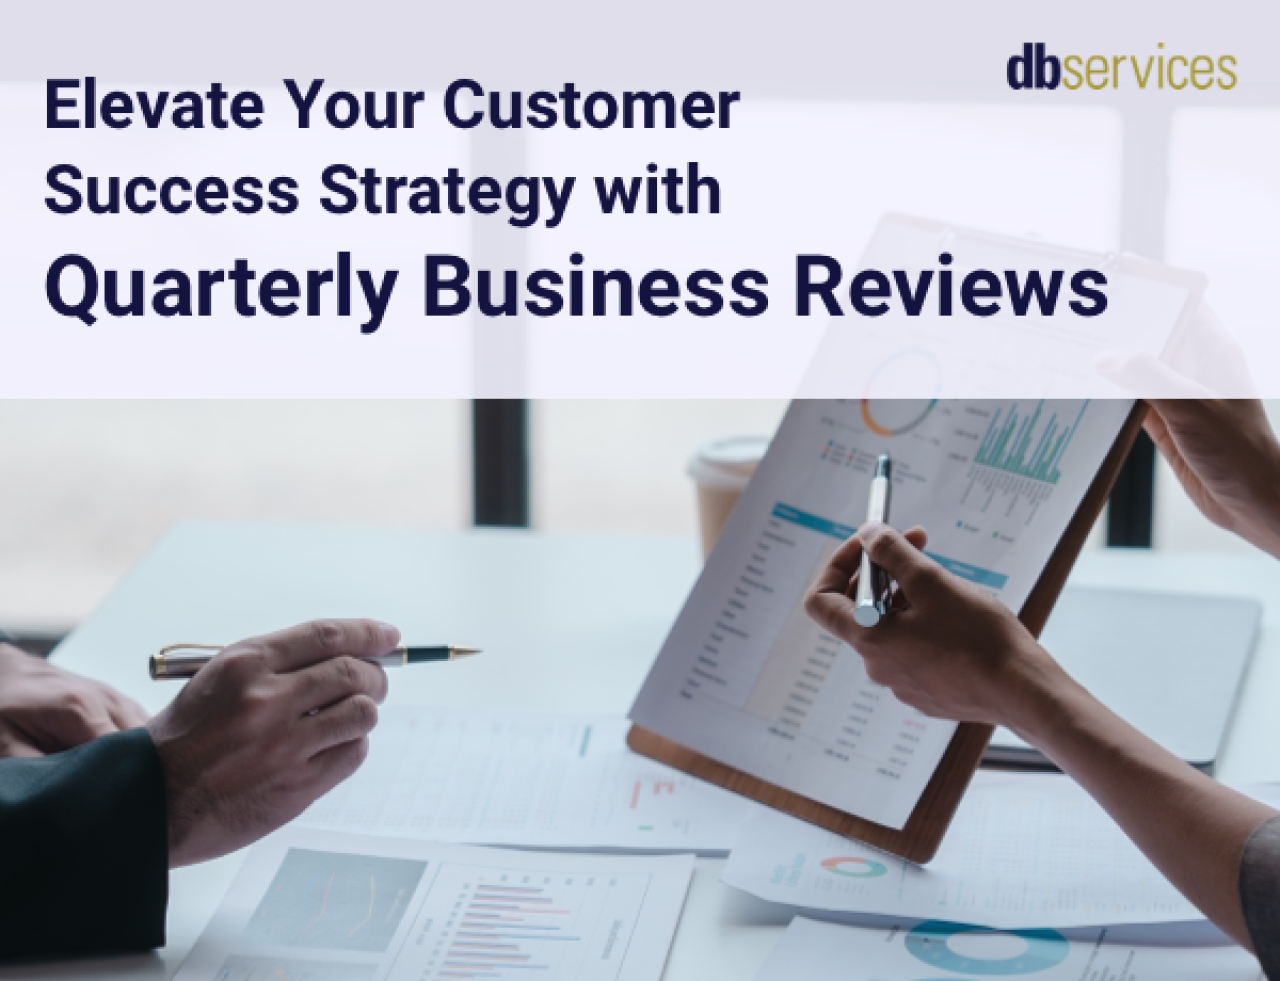 elevate your customer success strategy with quarterly business reviews.